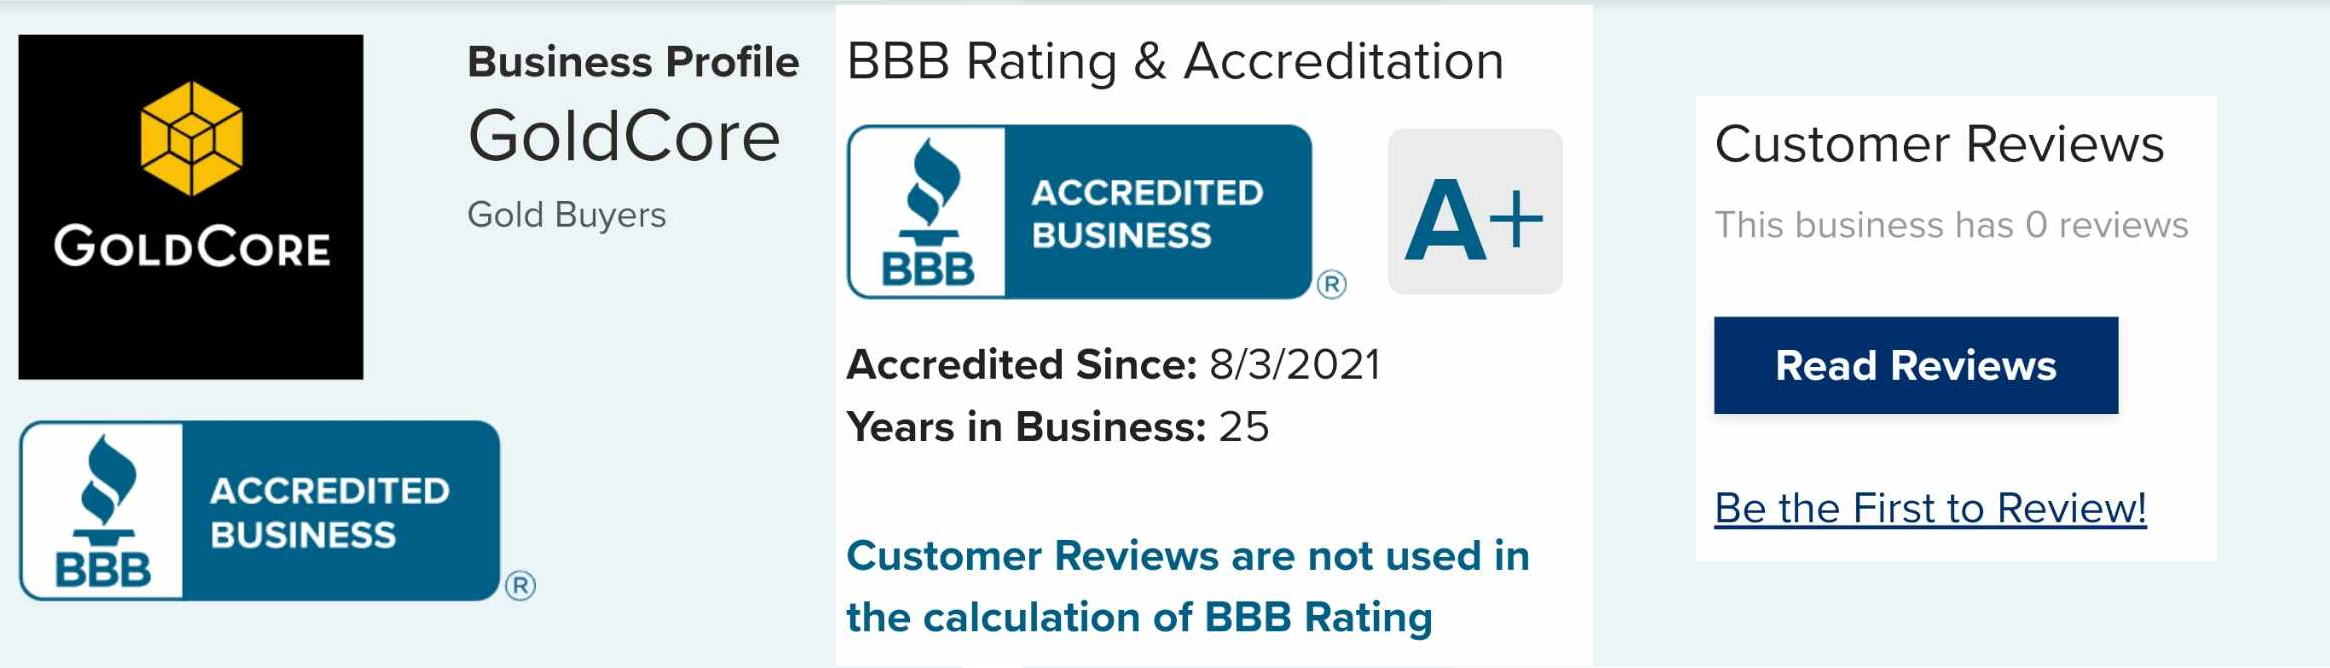 GoldCore Review BBB Rating